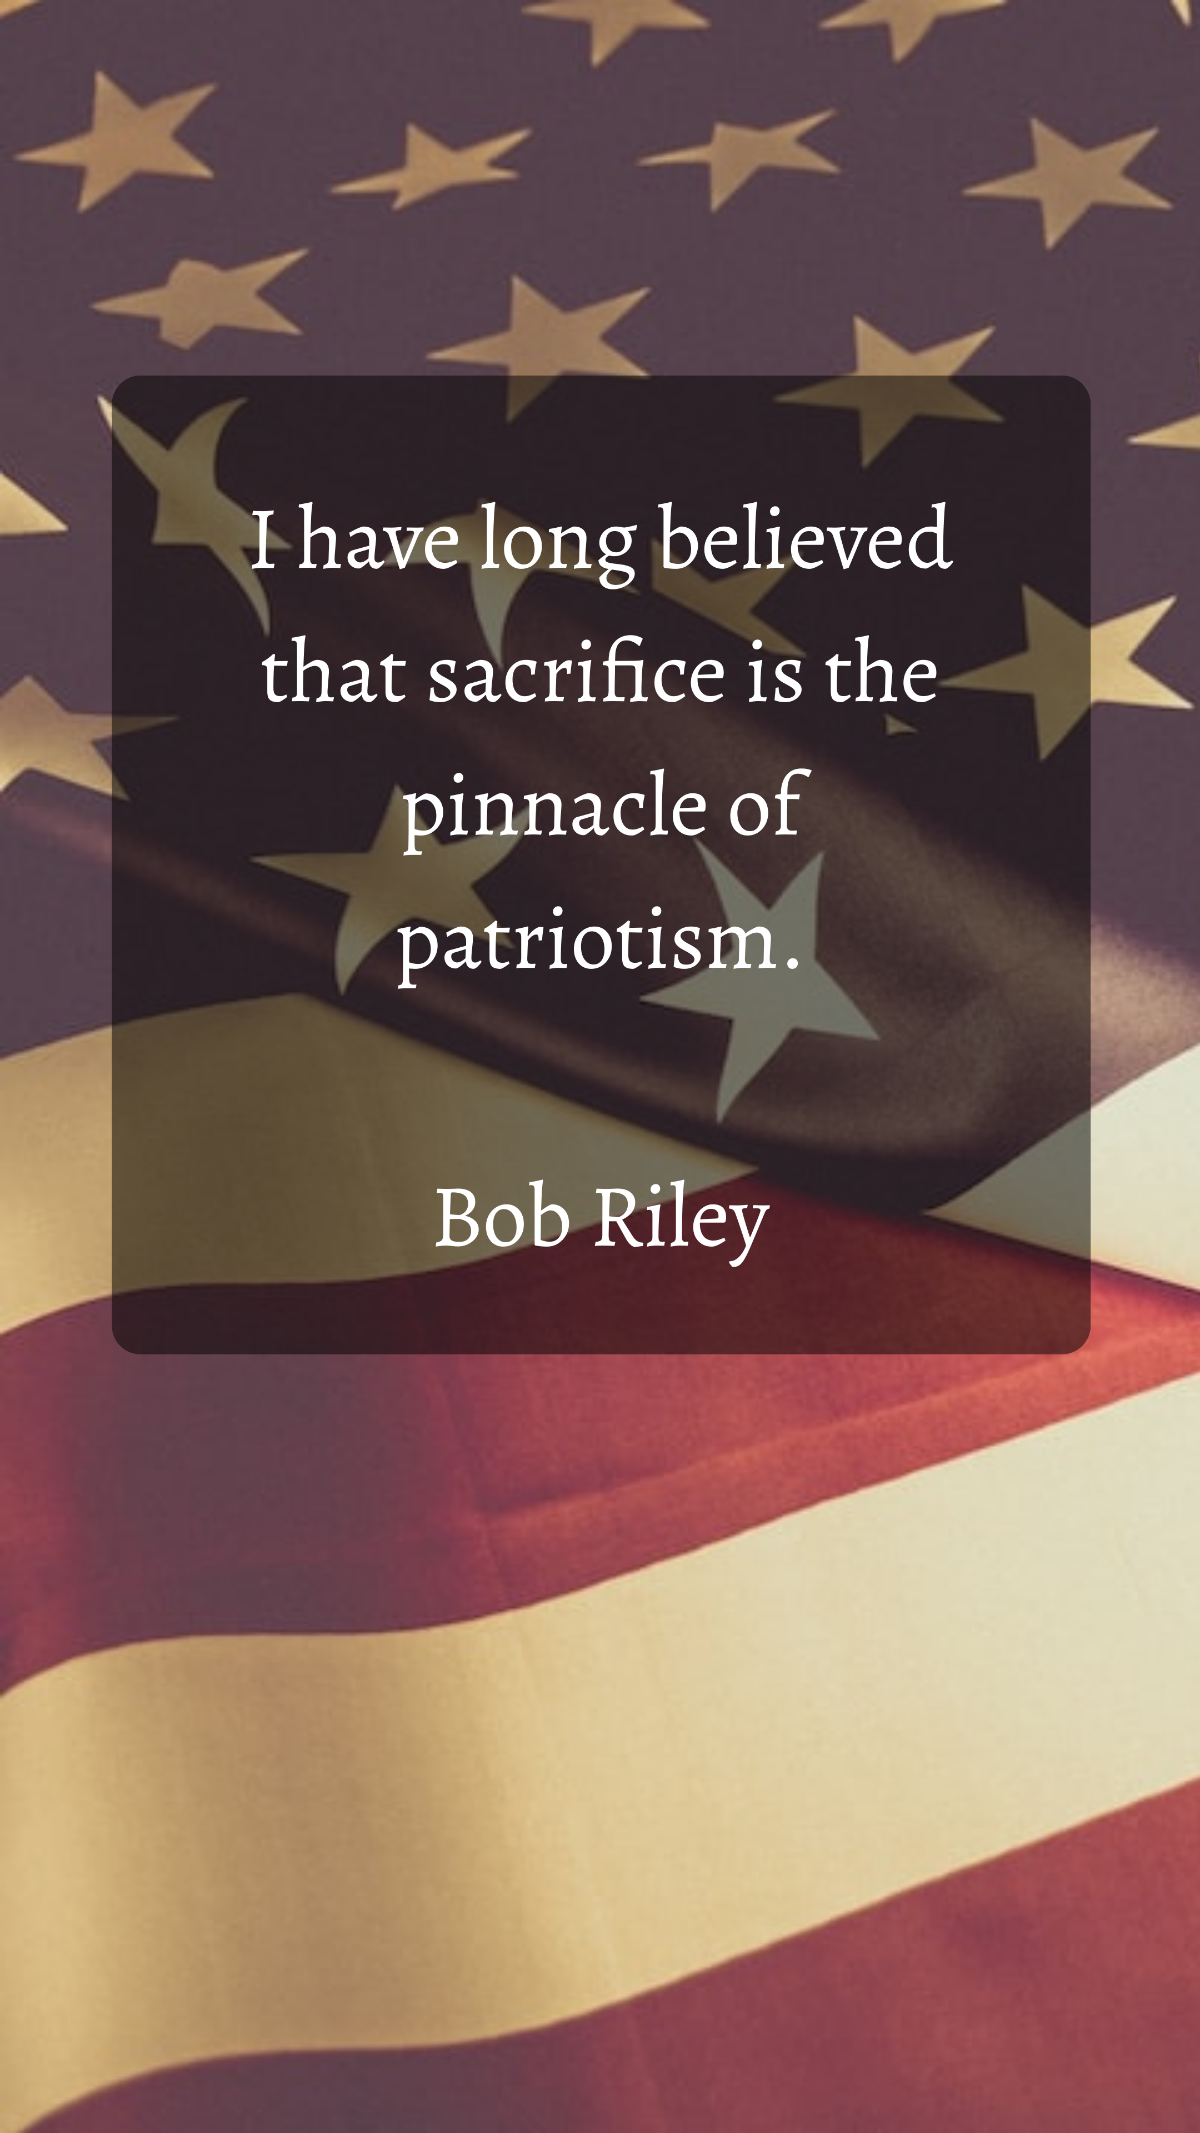 Free Bob Riley - I have long believed that sacrifice is the pinnacle of patriotism. Template